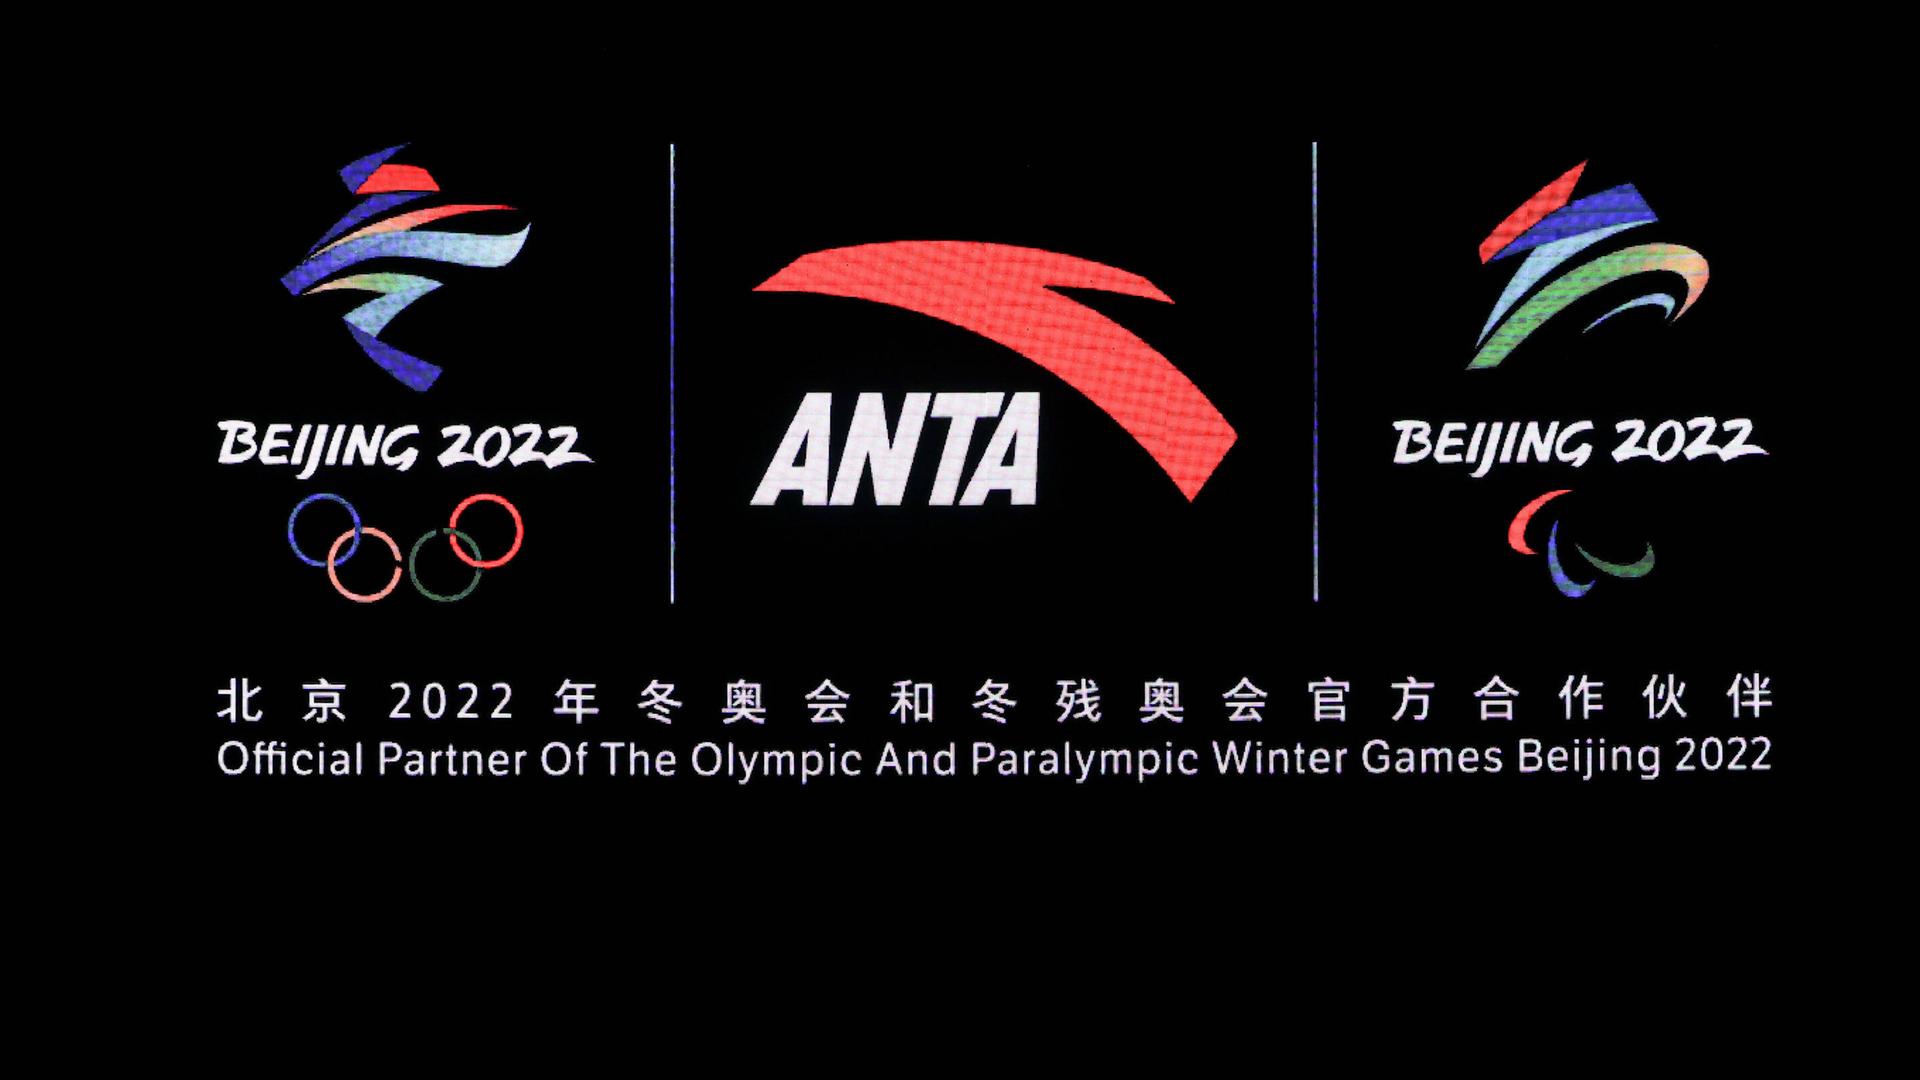 BEIJING, CHINA - OCTOBER 27: The release ceremony of uniforms for Beijing 2022 Olympic and Paralympic Winter games, Wint